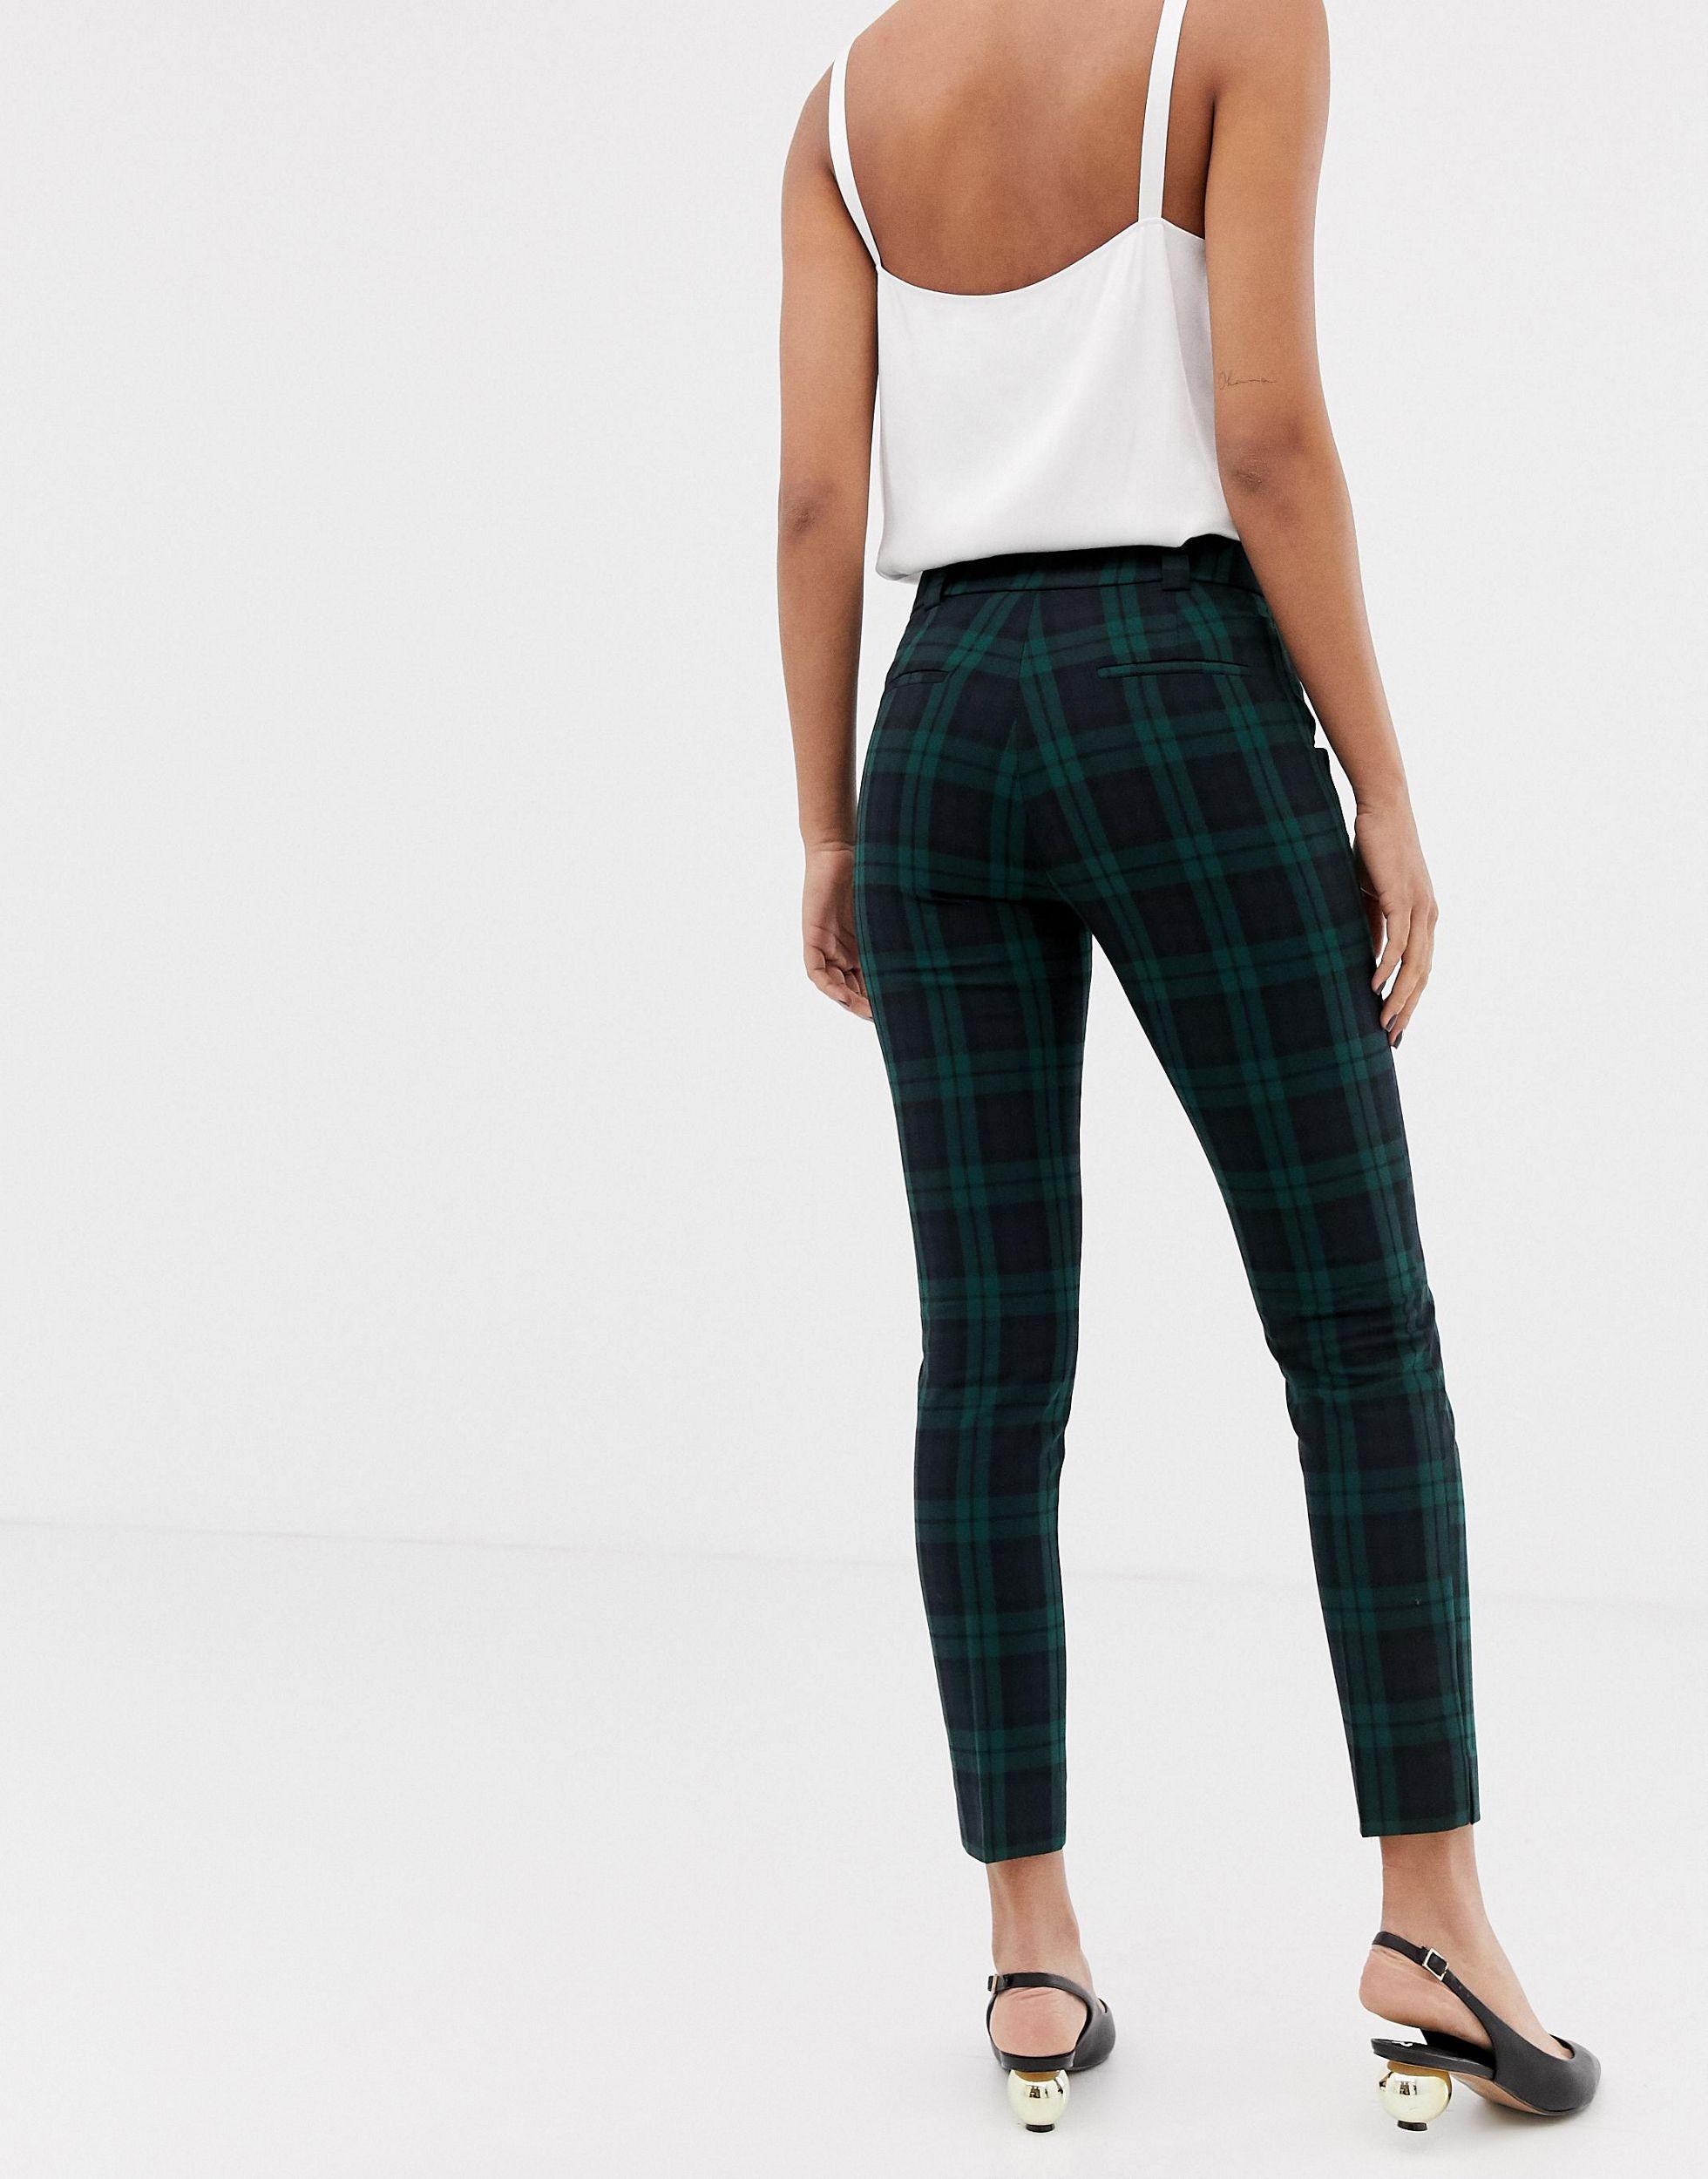 Mango Blue And Green Plaid Pants Two-piece